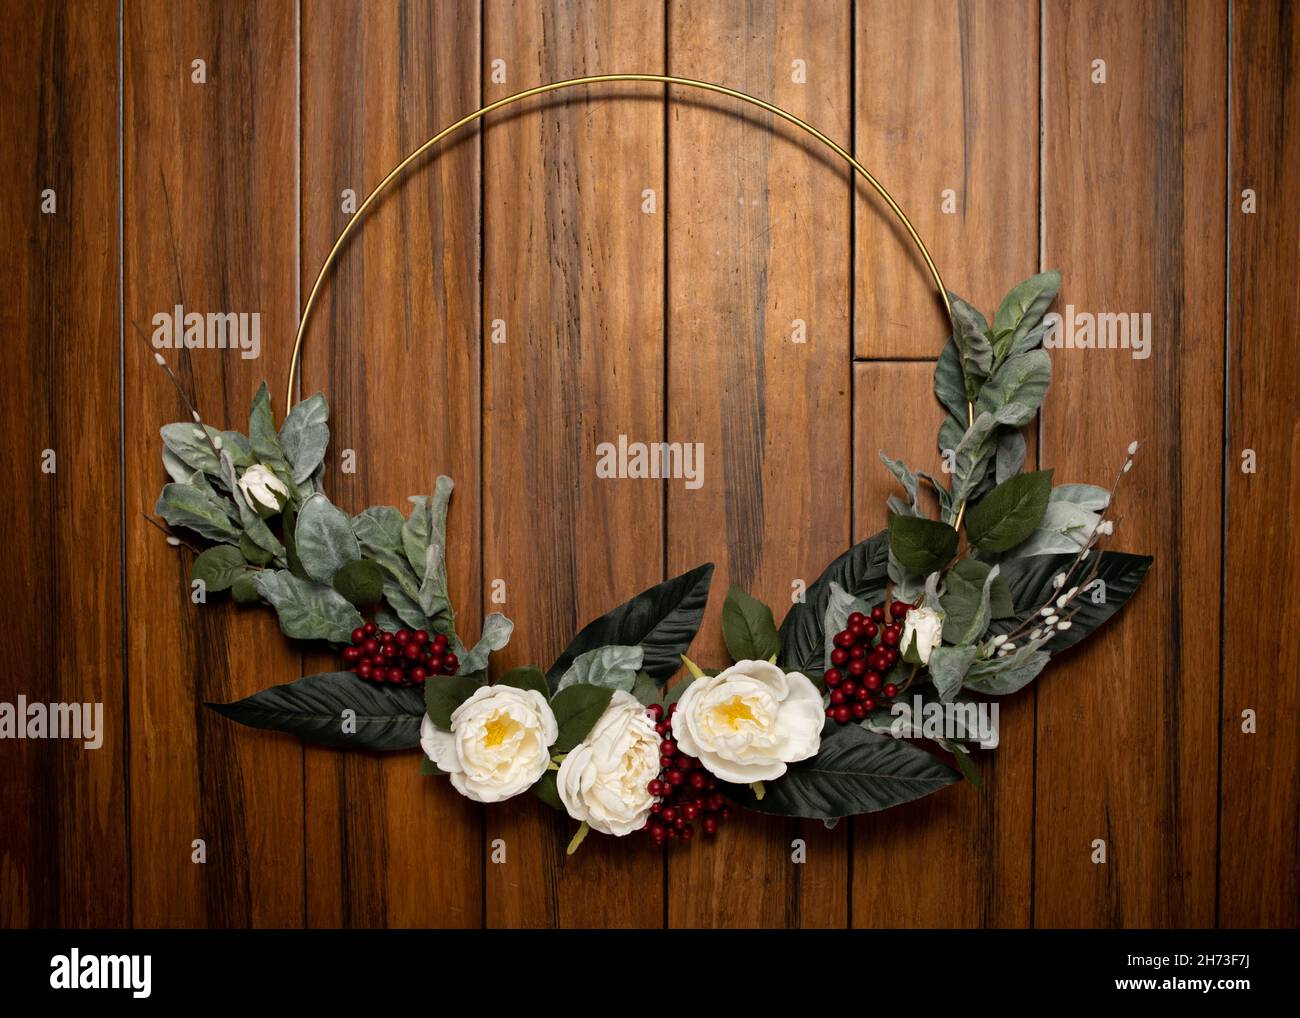 Modern Christmas Wreath on wood background with cranberries Stock Photo